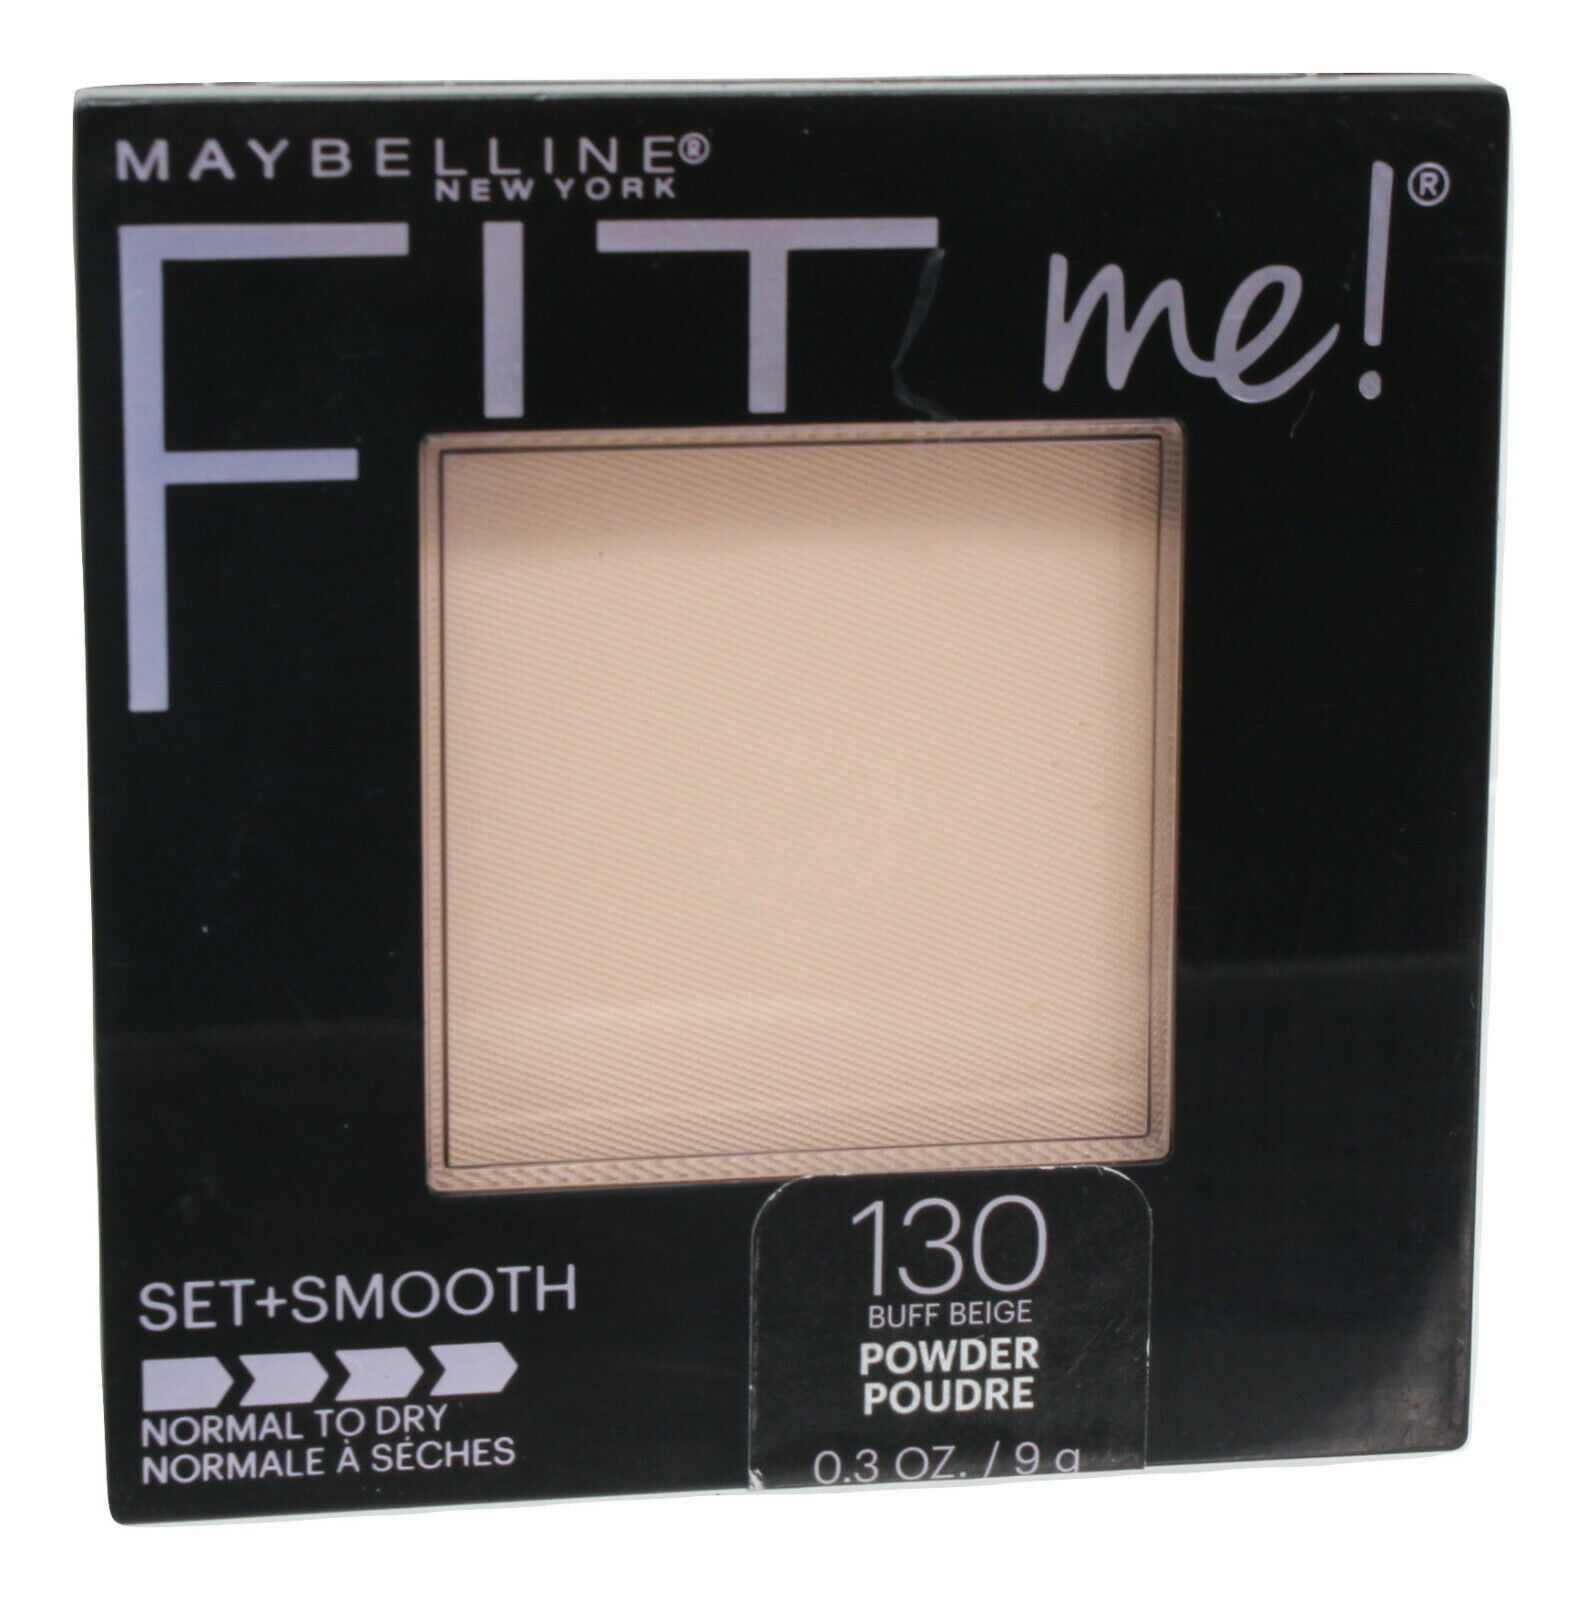 Primary image for Maybelline New York Fit Me! Set + Smooth Buff Beige Pressed Powder 0.3oz Compact